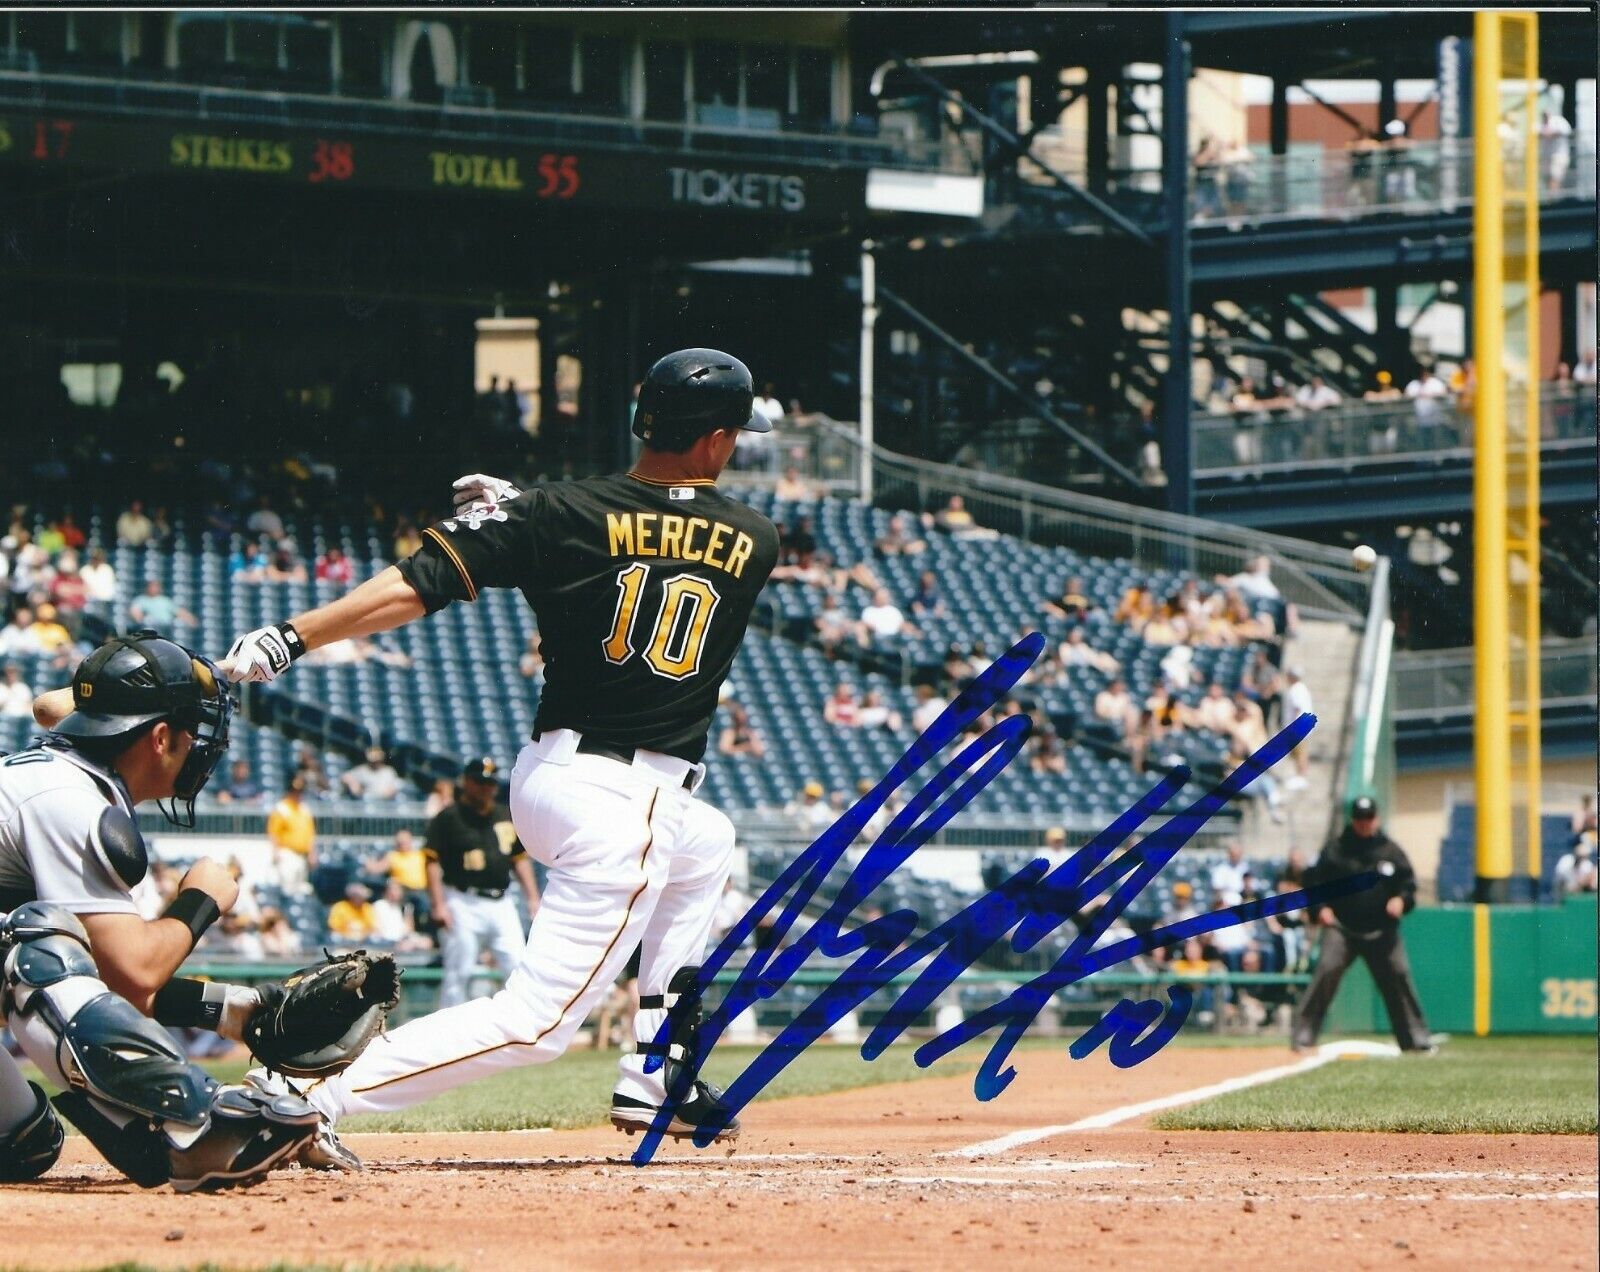 Signed 8x10 JORDY MERCER Pittsburgh Pirates Autographed Photo Poster painting - COA